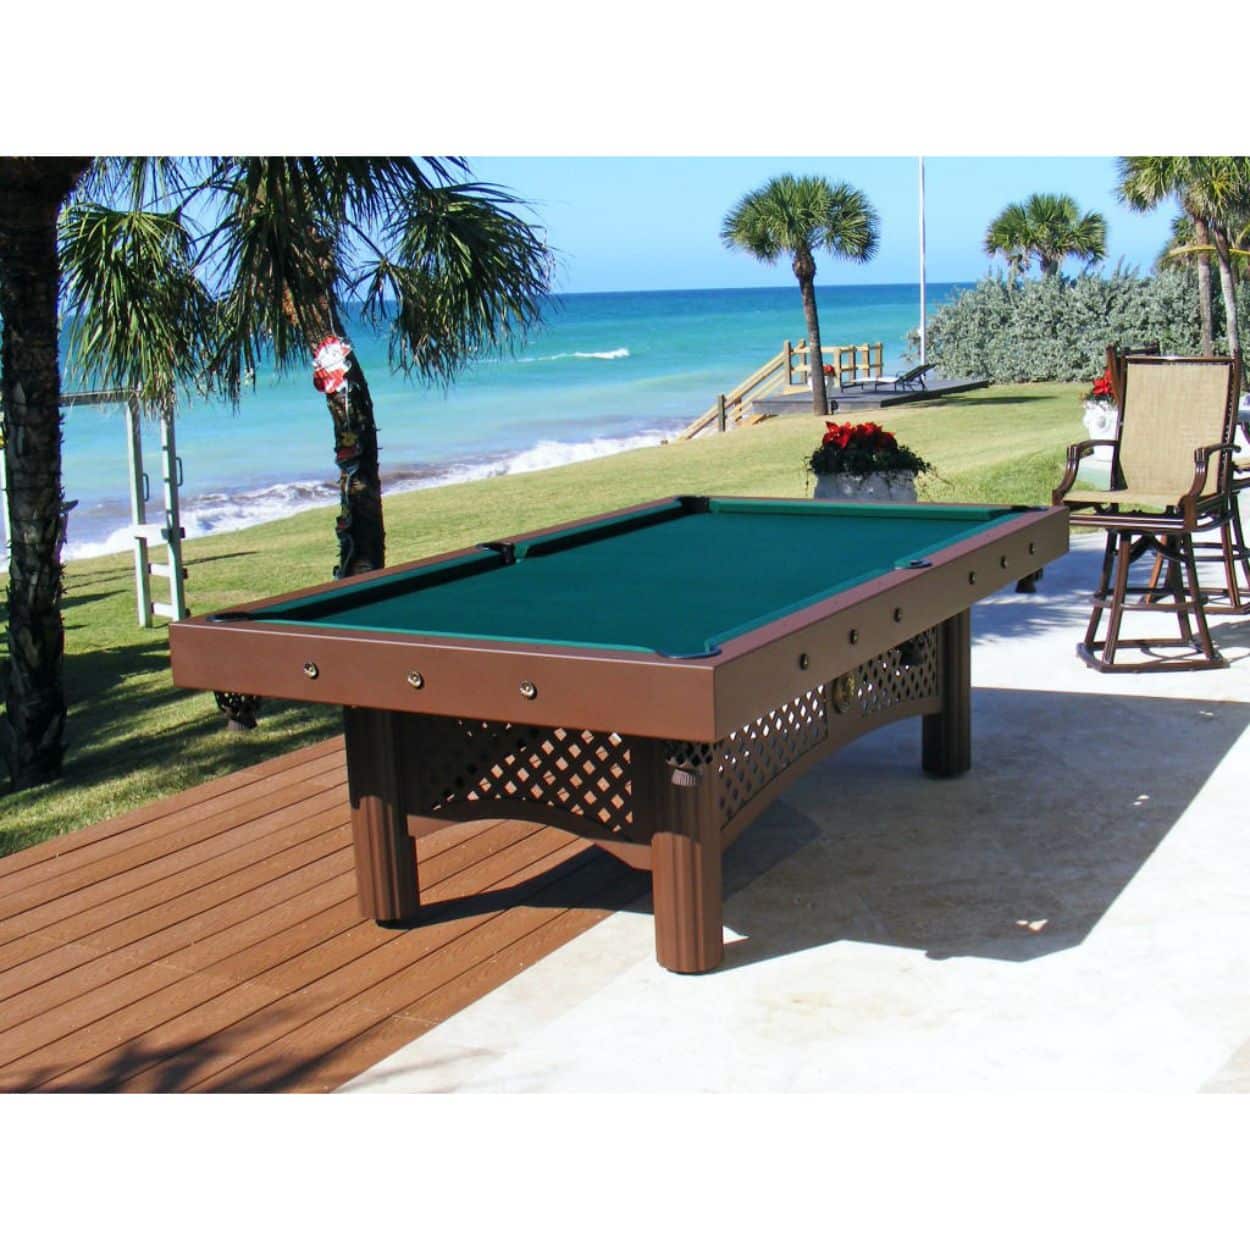 Types Of Pool Tables You Should Look Out For